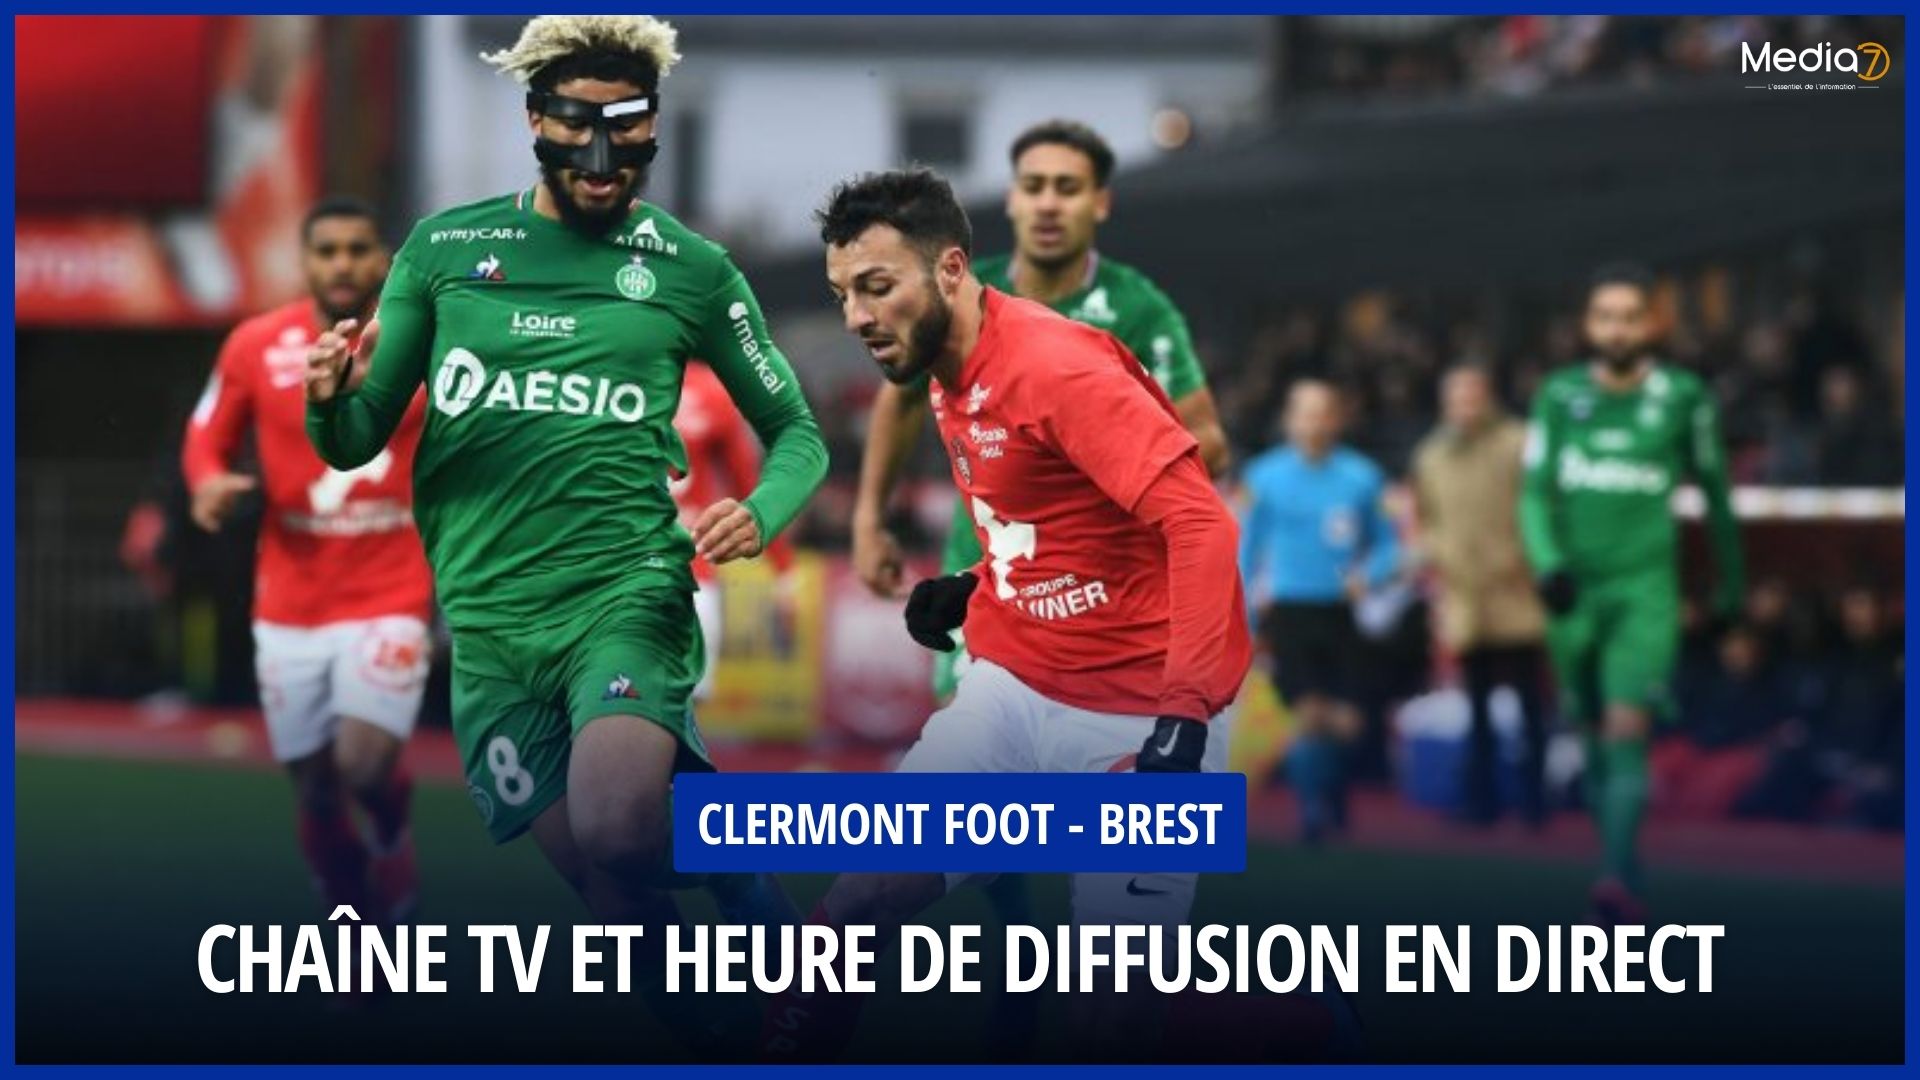 Clermont Foot - Brest match live: TV channel and broadcast schedule - Media7